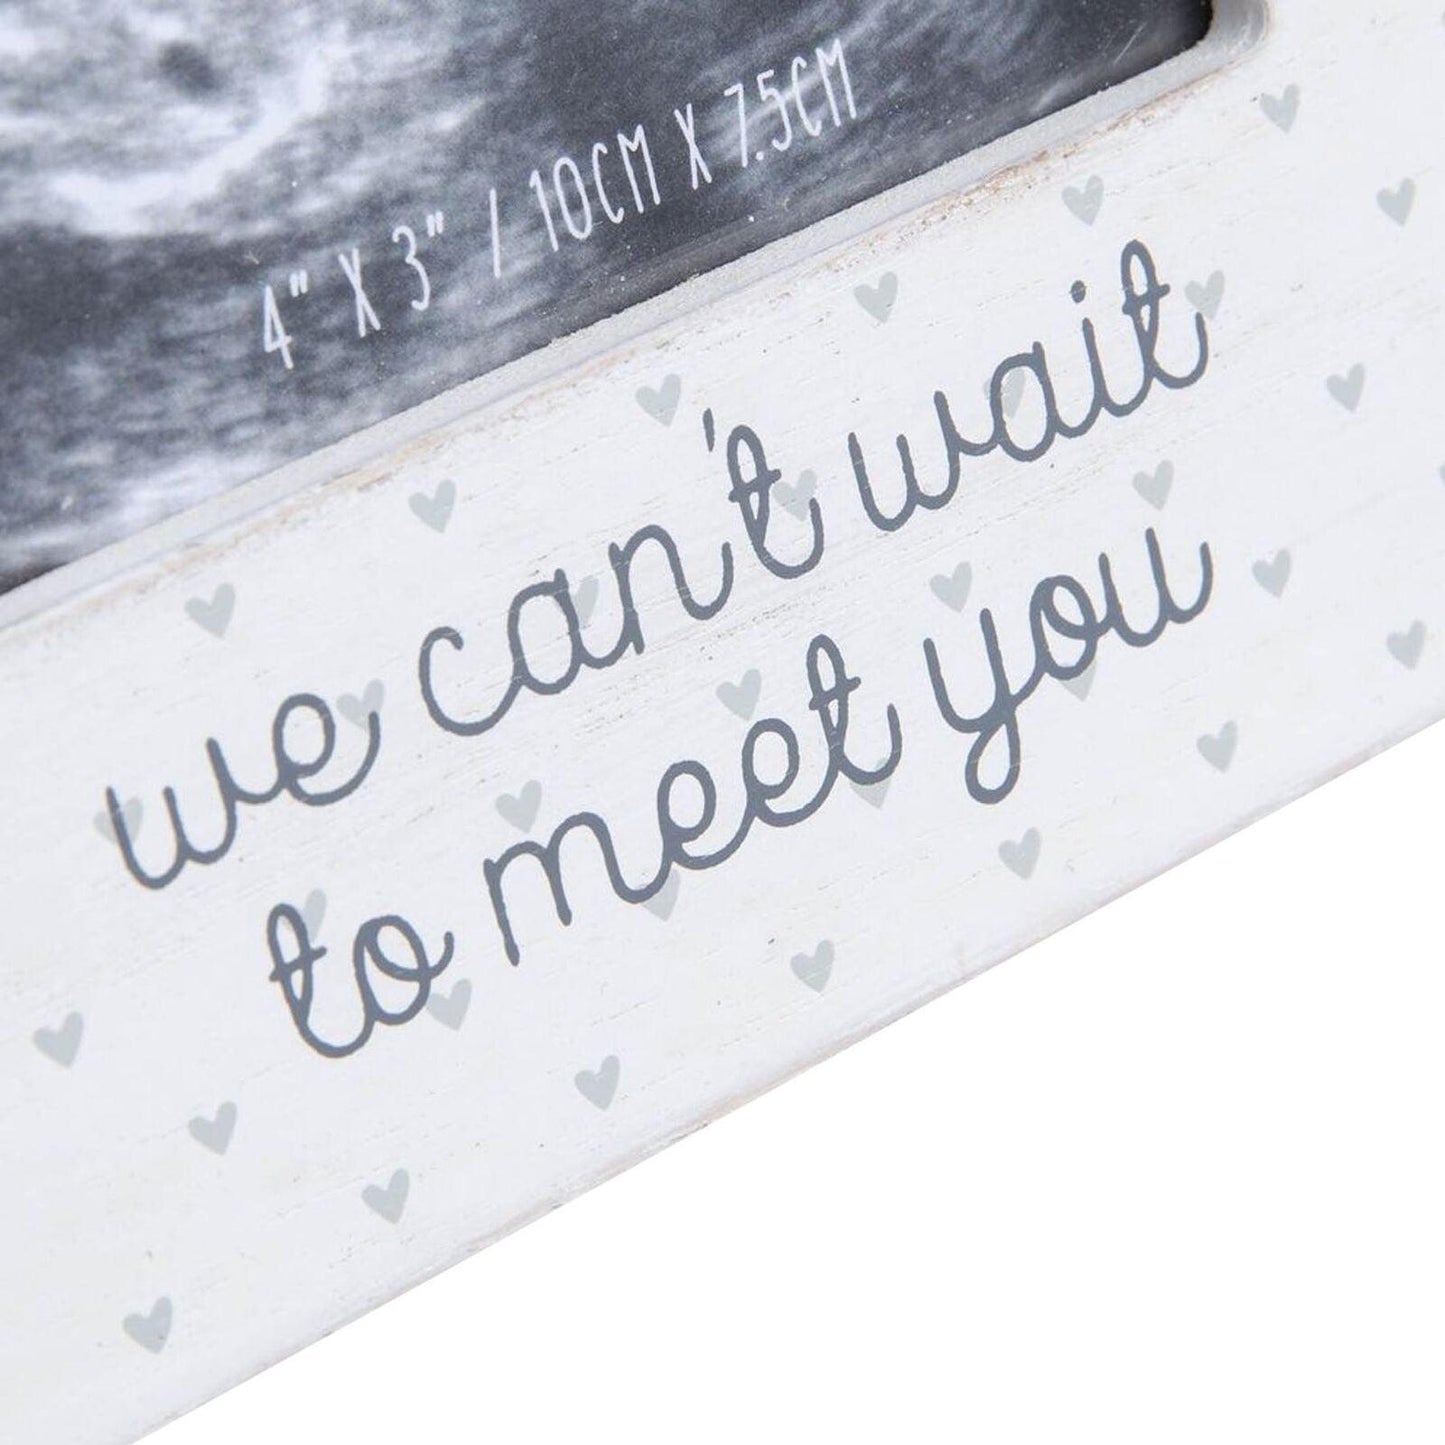 Baby Scan Pregnancy Announcement White Wooden Photo Frame